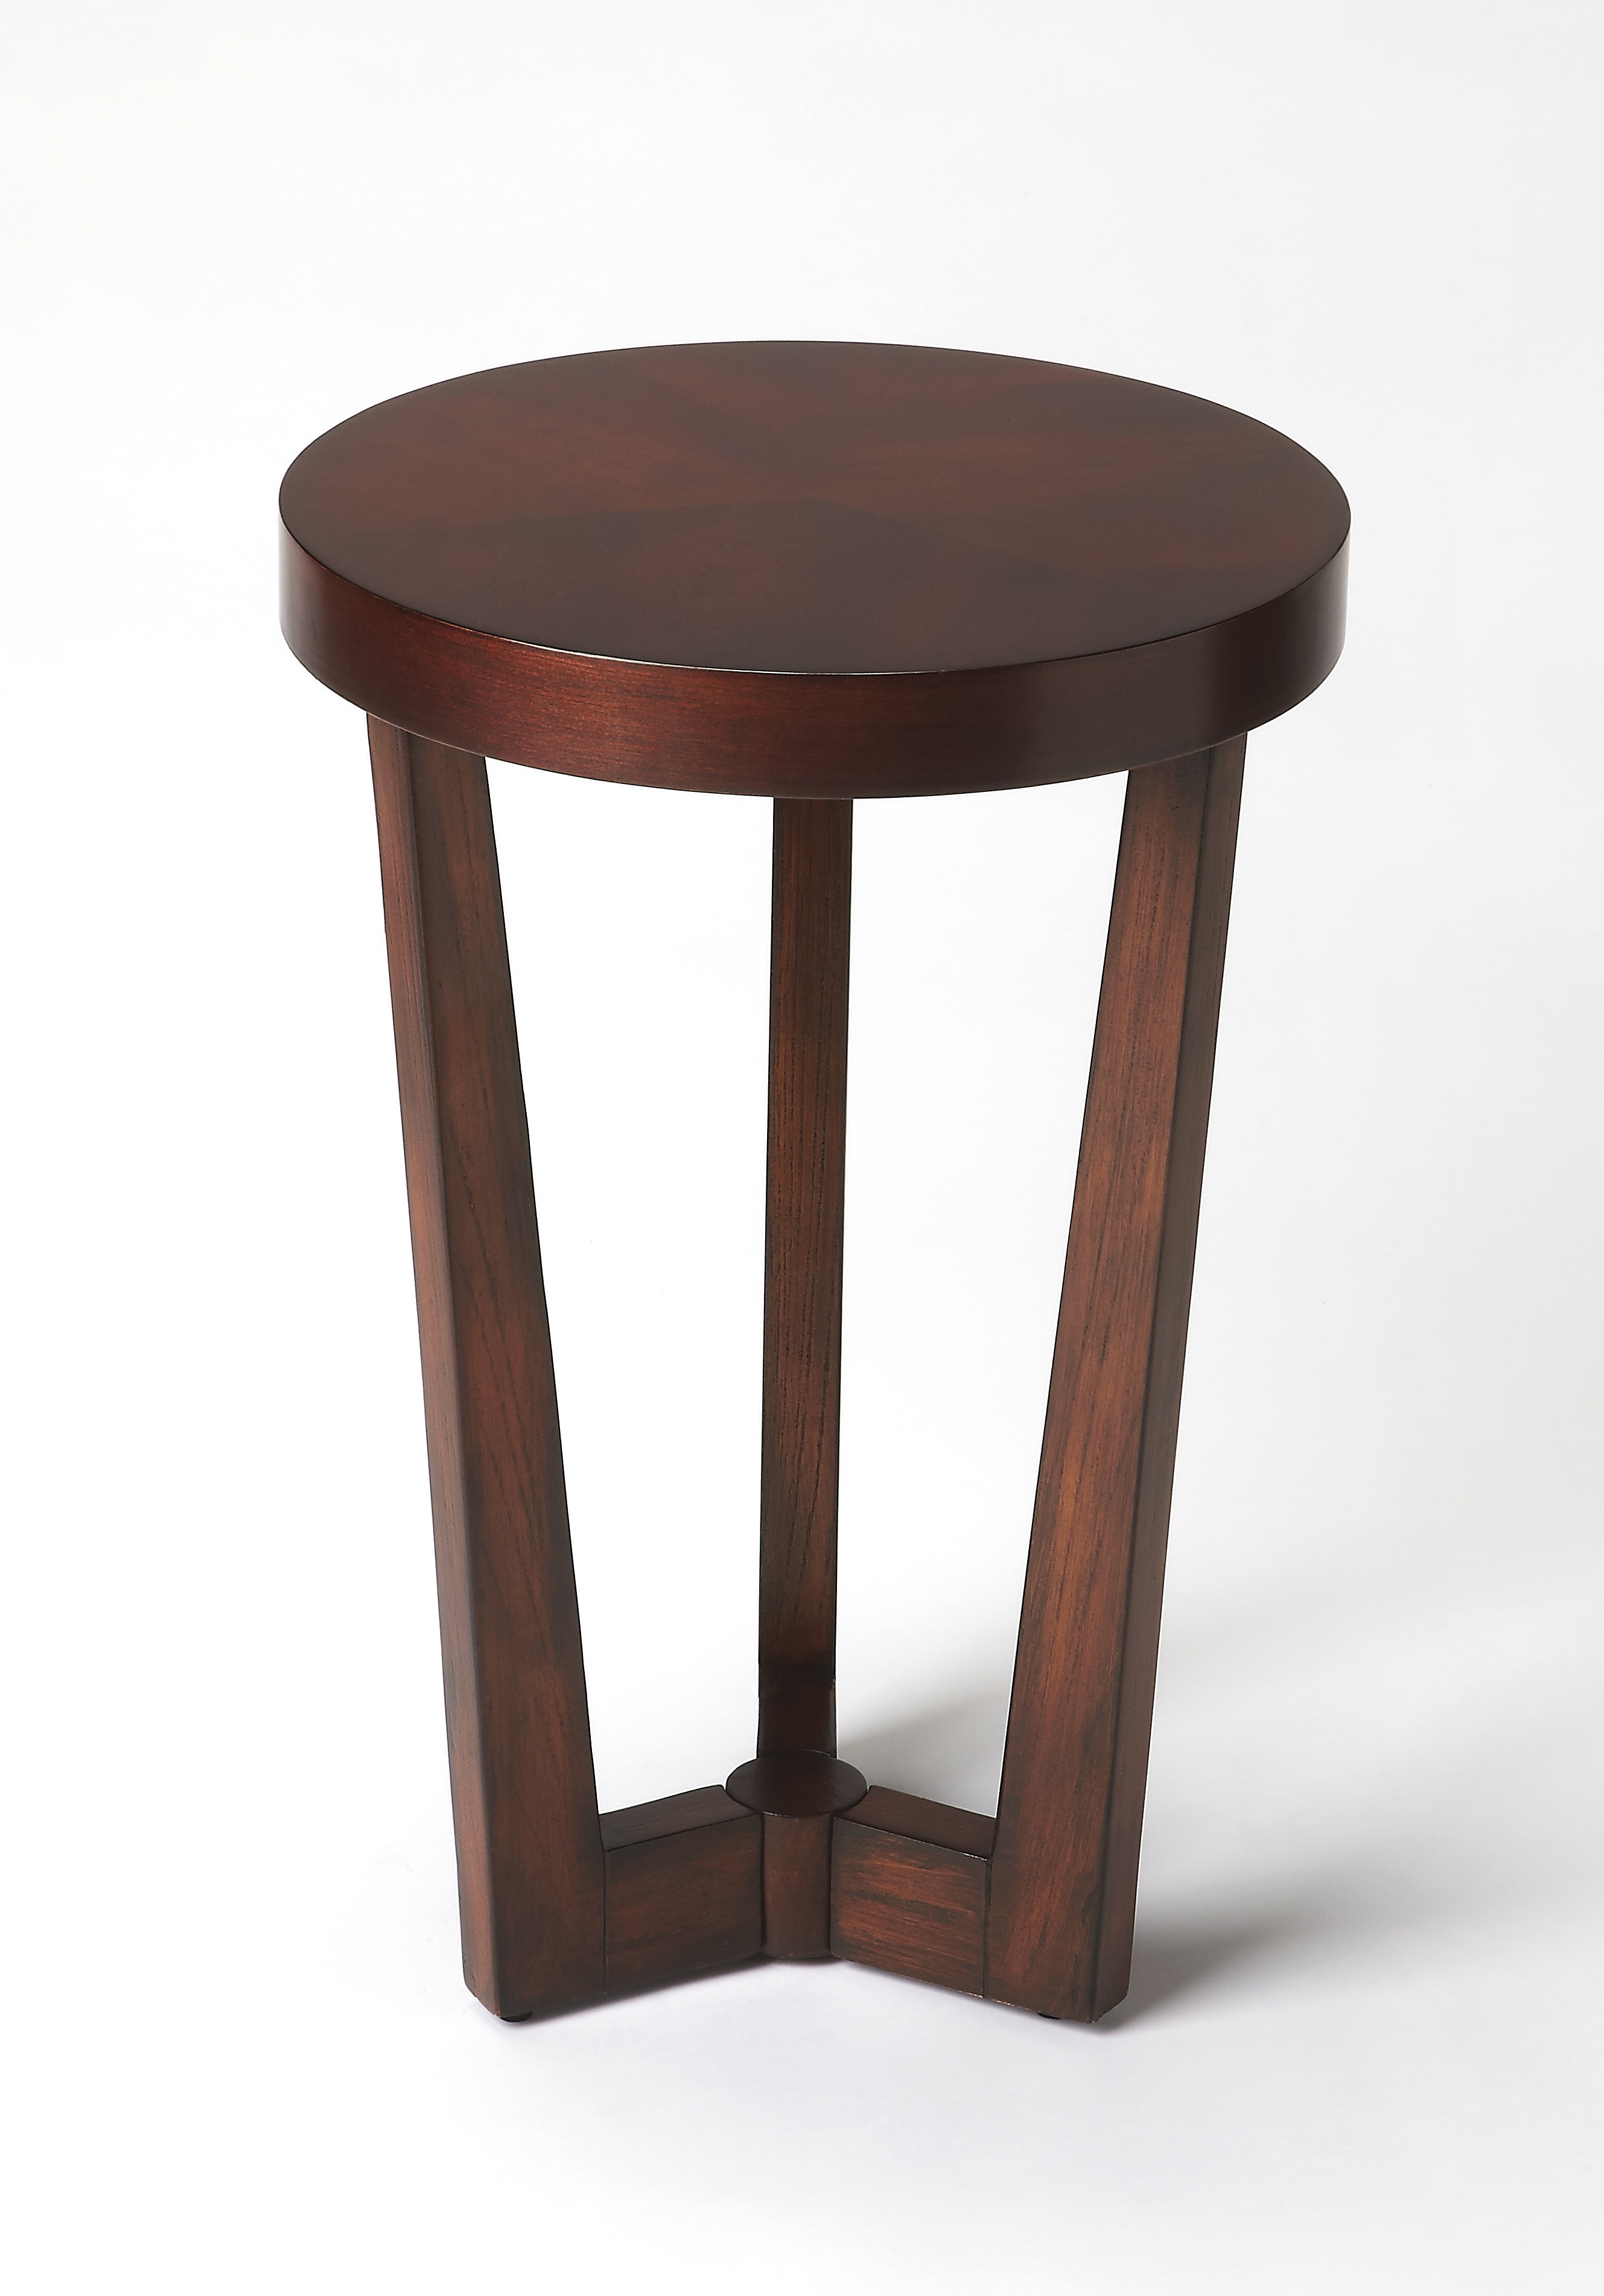 Aphra Cherry Side Table - Image 0